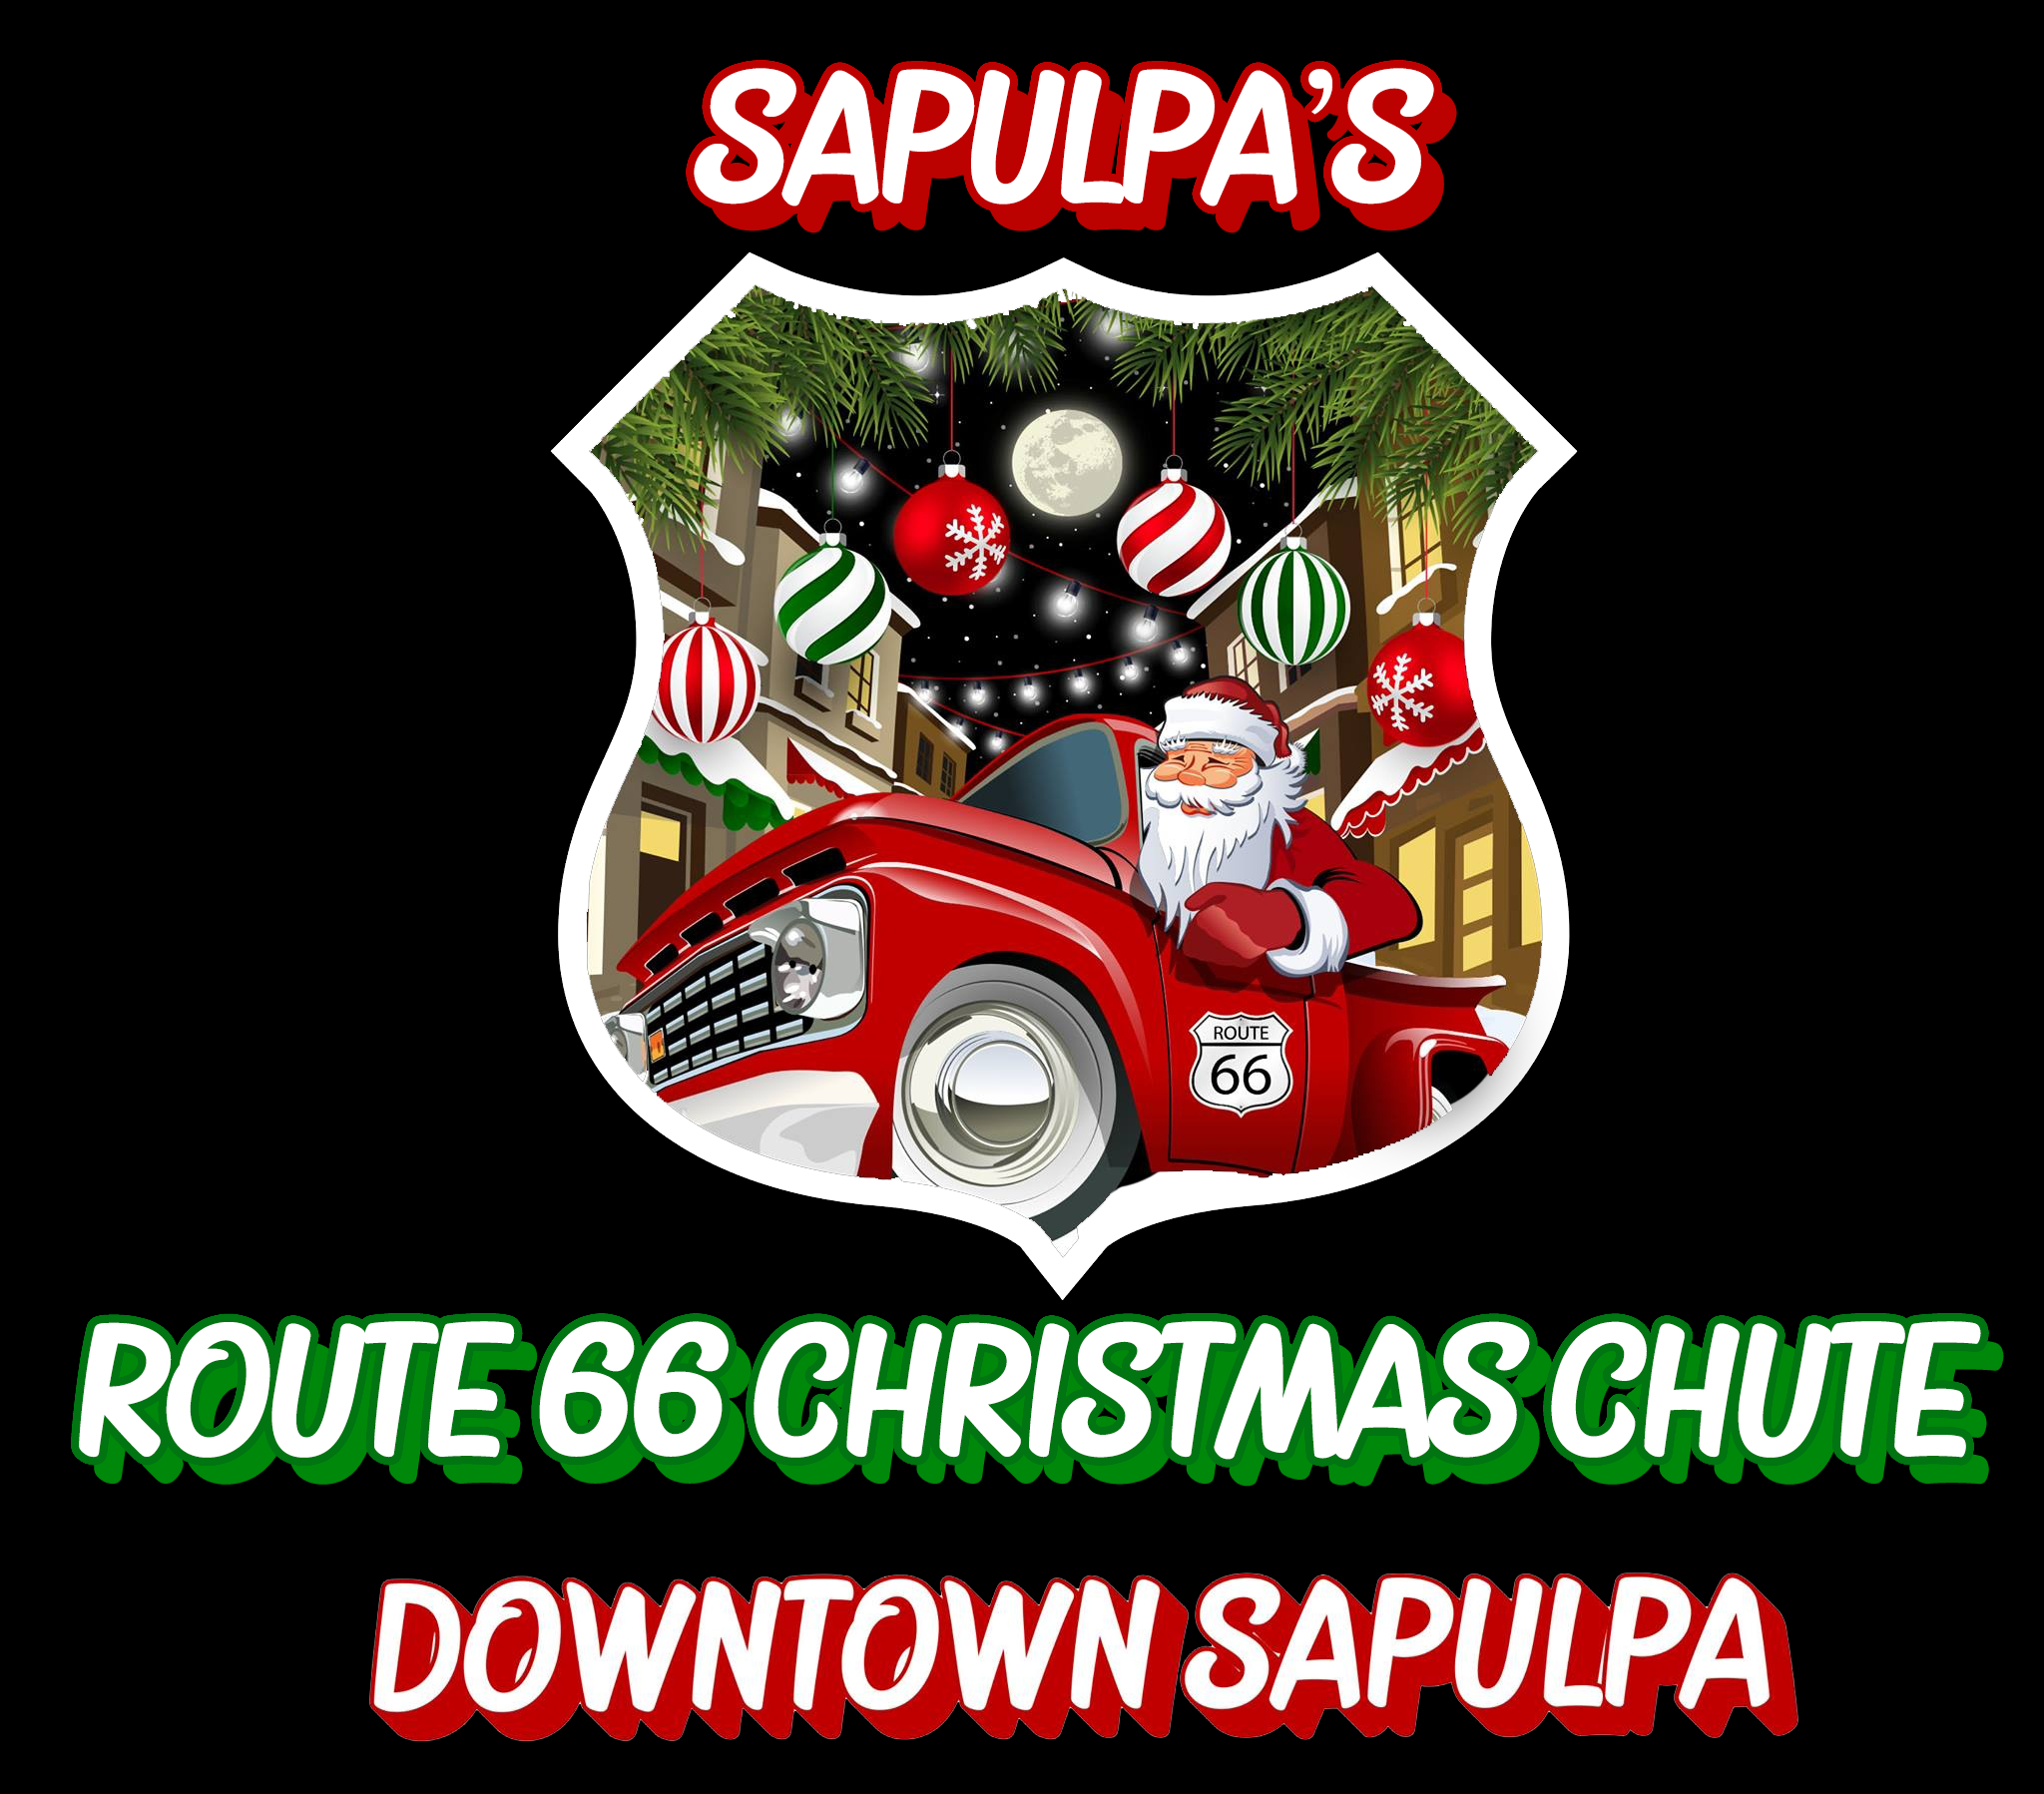 Join us in Downtown Sapulpa for a magical evening of Christmas Lights, events, shopping and dinning at the Sapulpa Route 66 Christmas Chute!